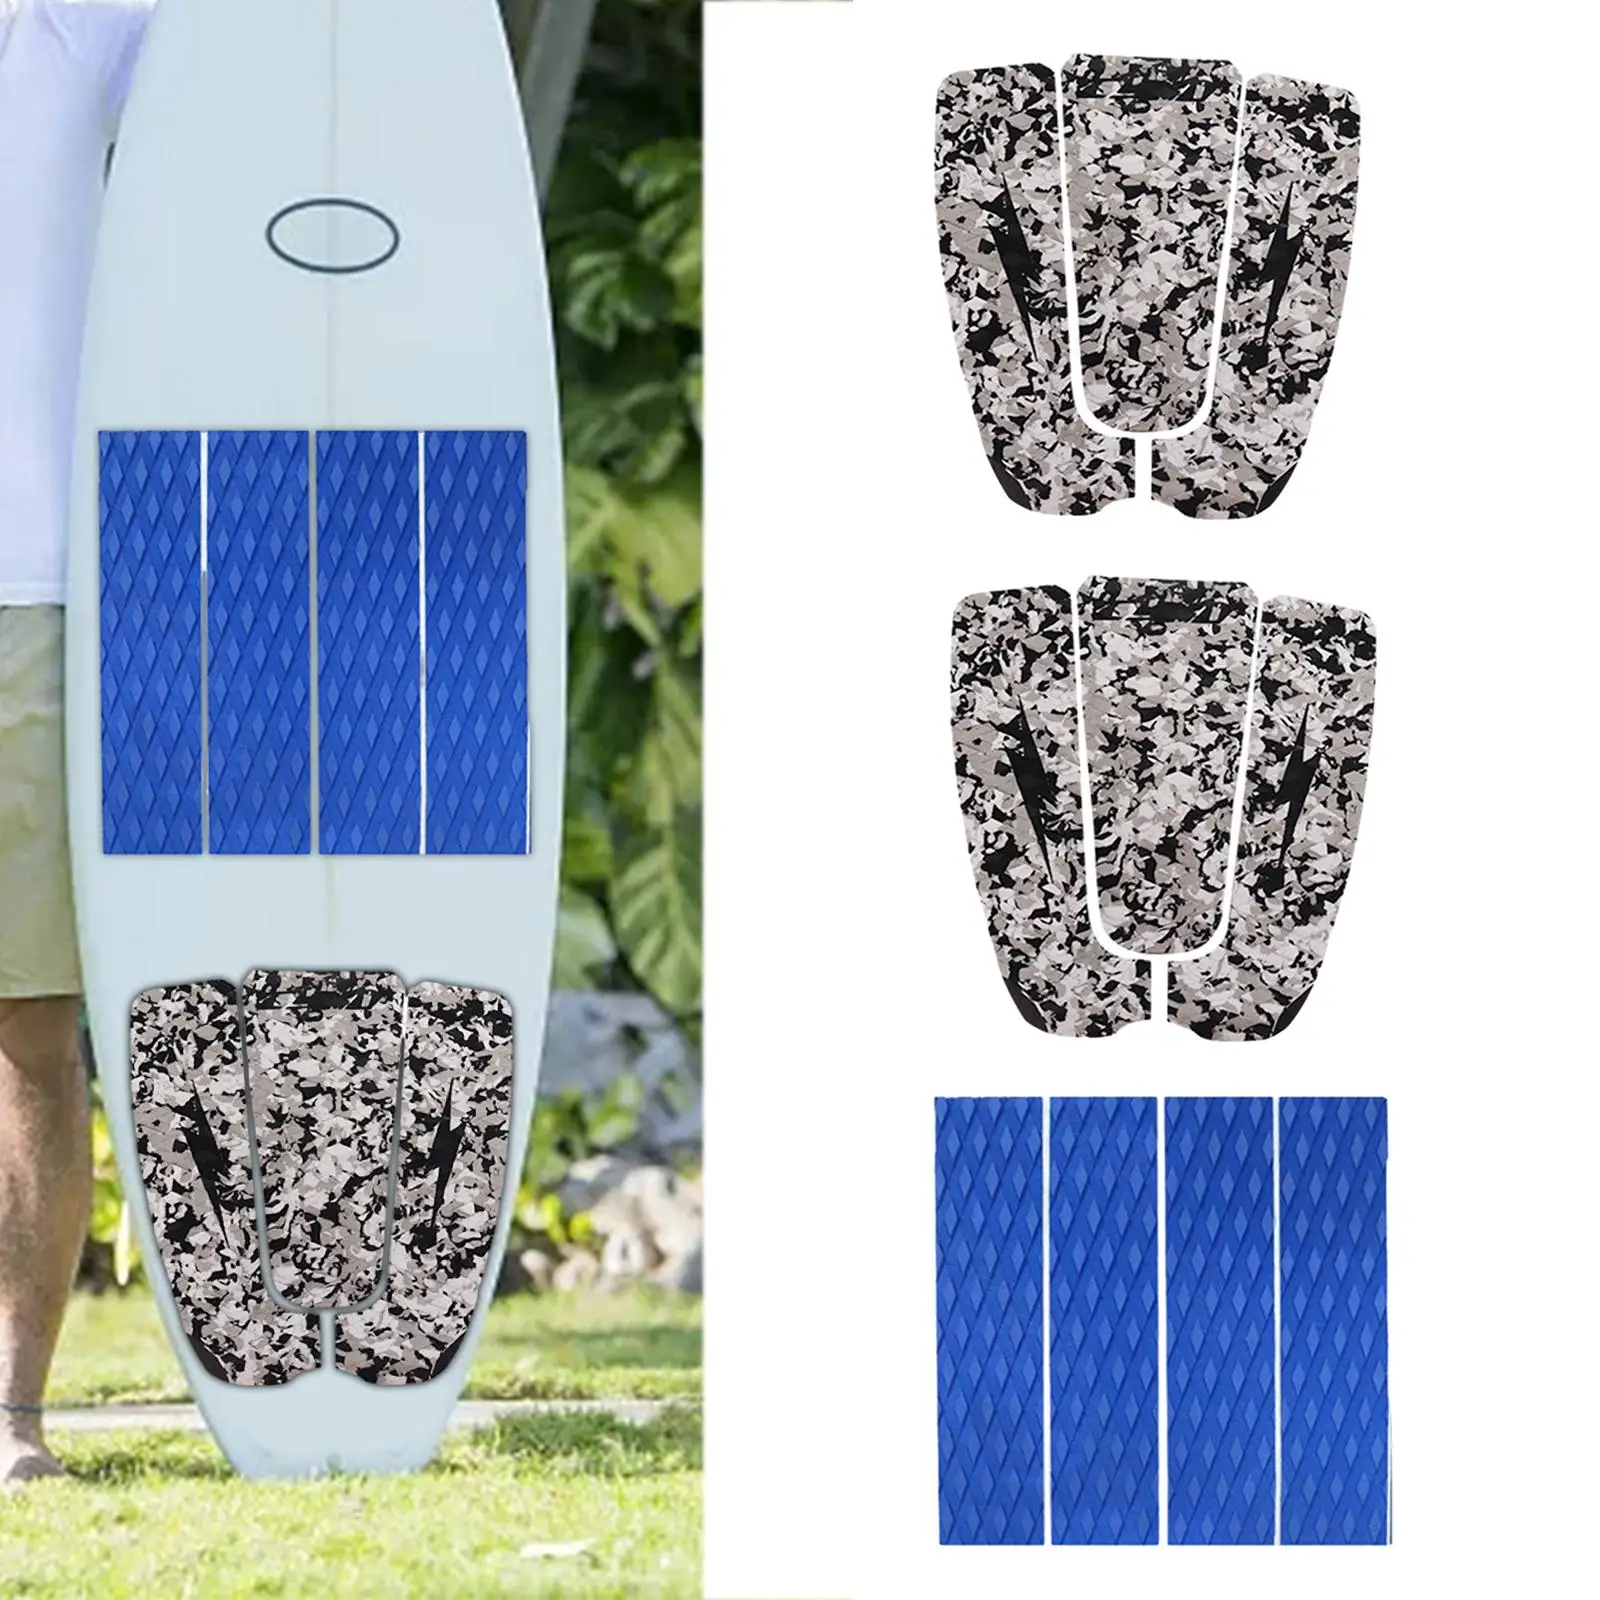 Premium Surfboard Traction Pad, Full Size, Maximum Grip, Sticky, for Surfing or Skimboarding